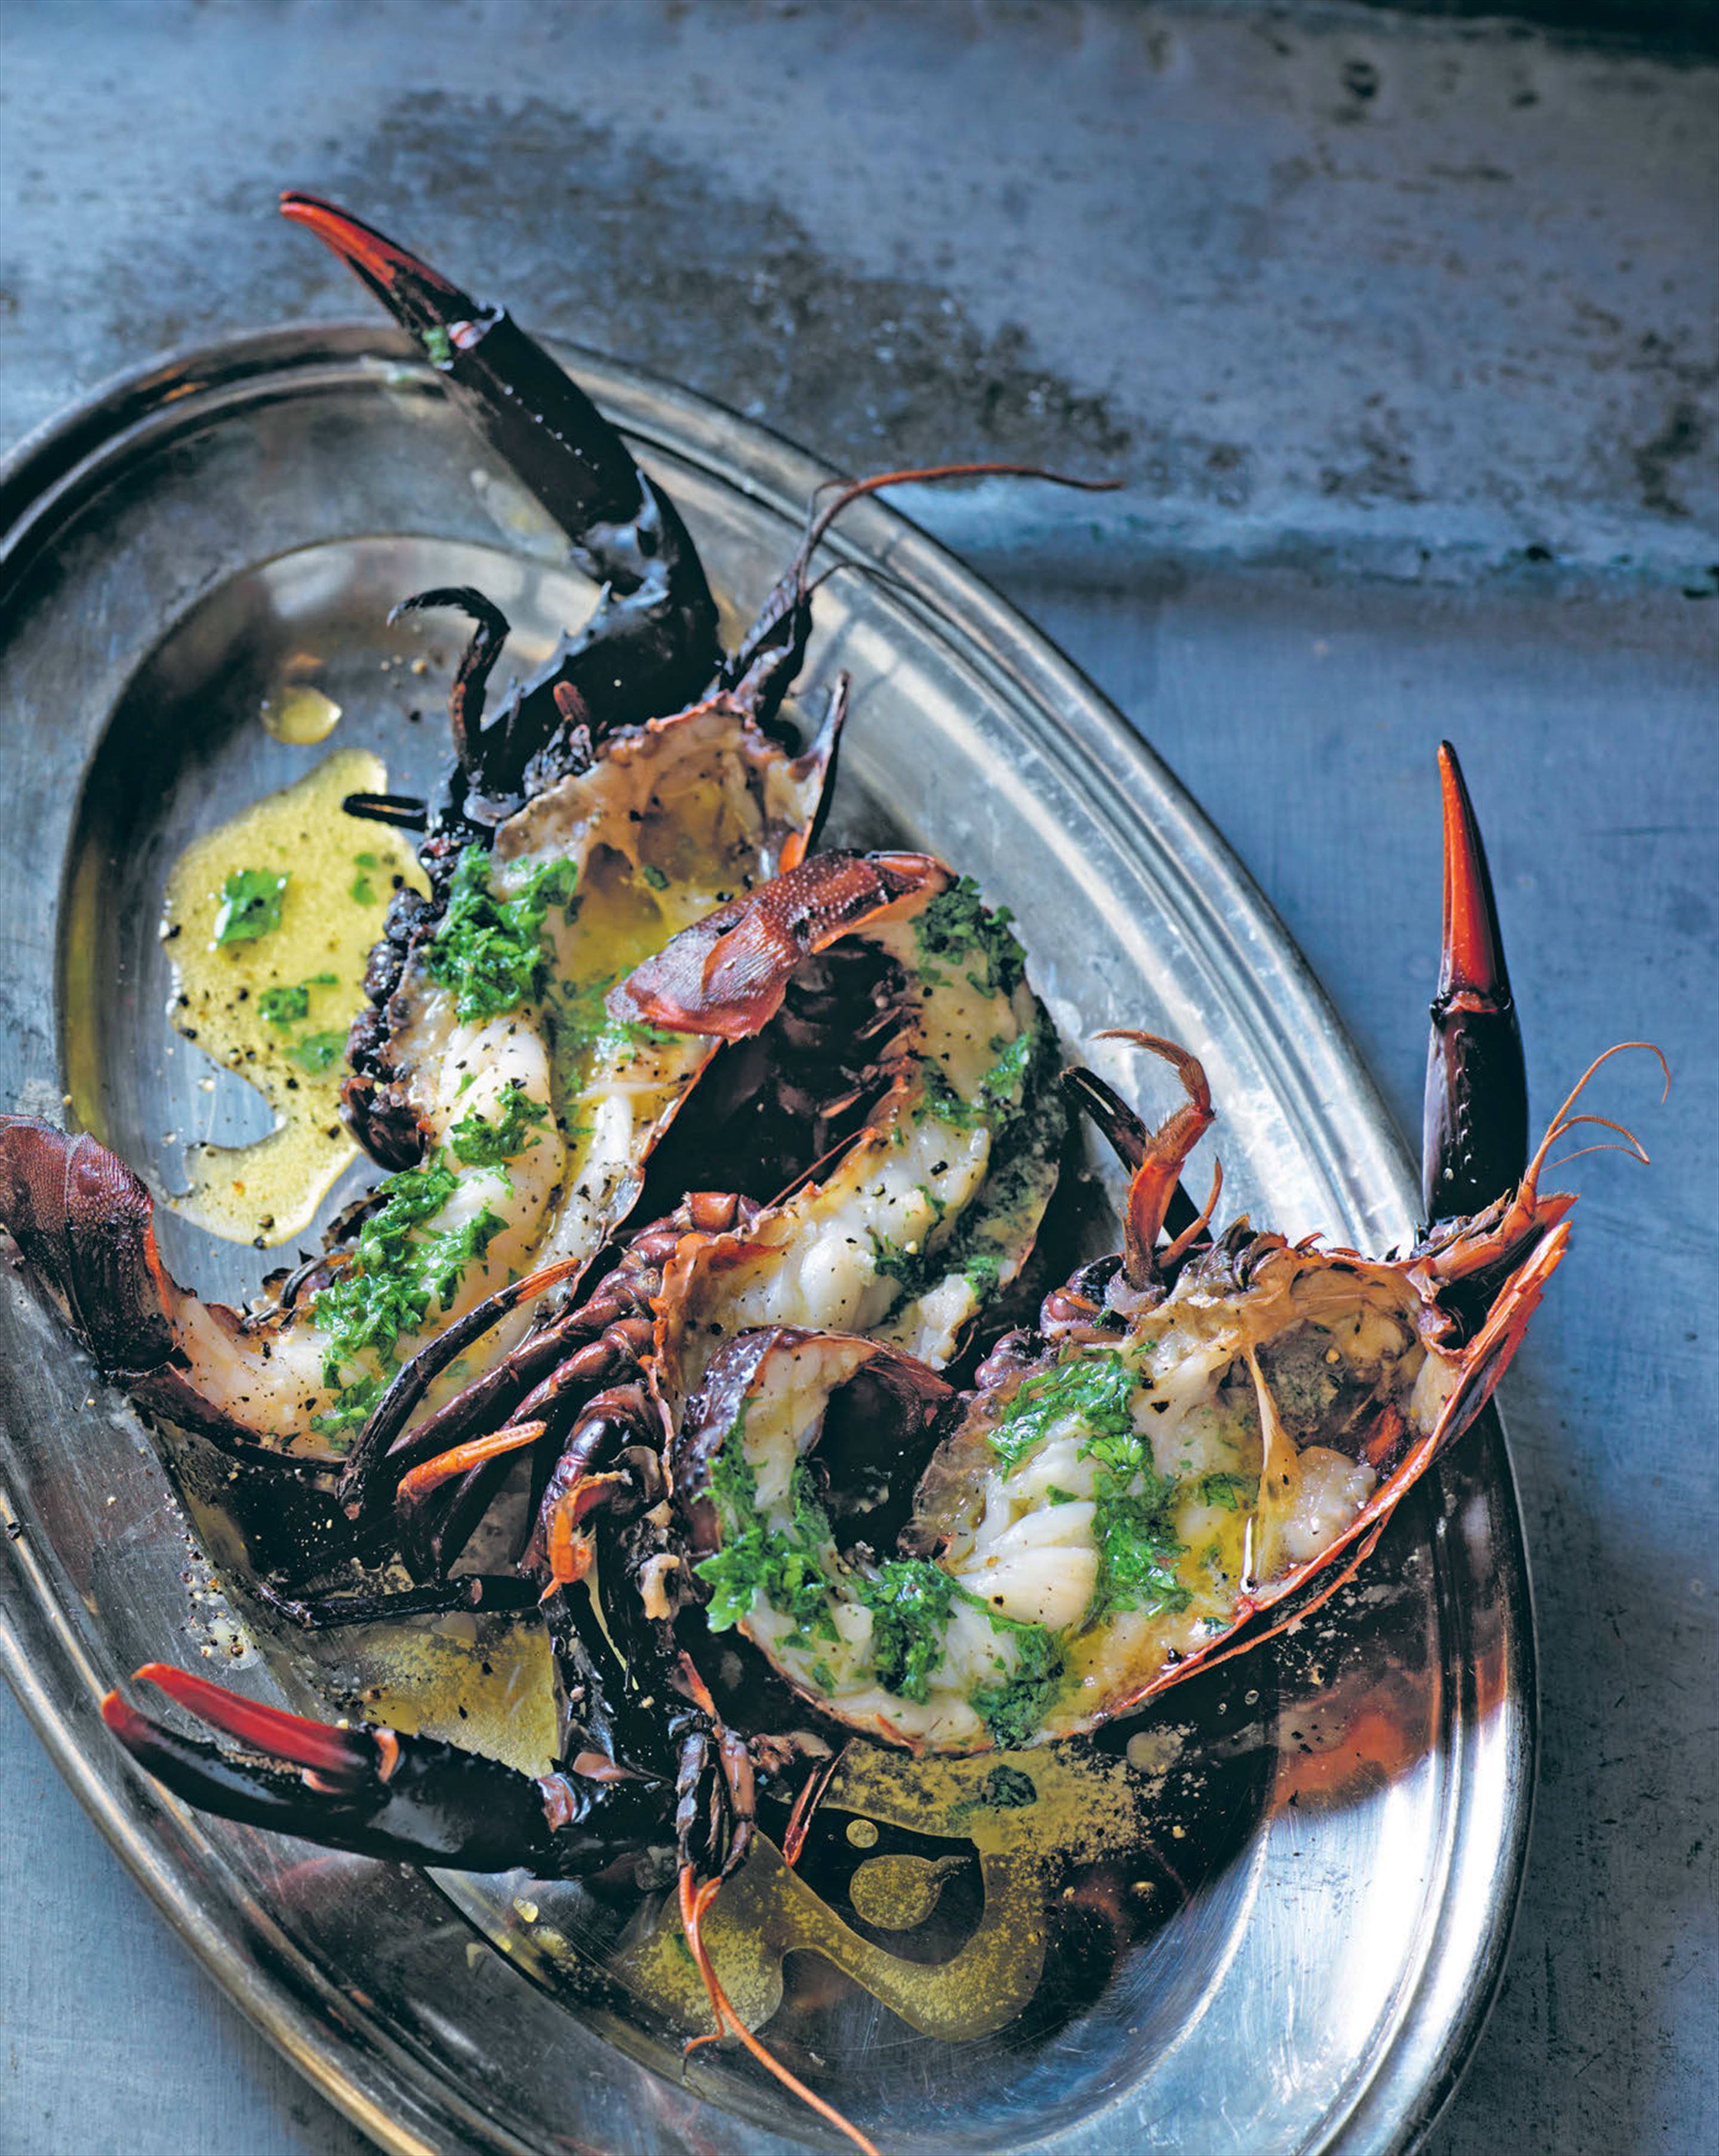 Homard lobster baked in corail butter